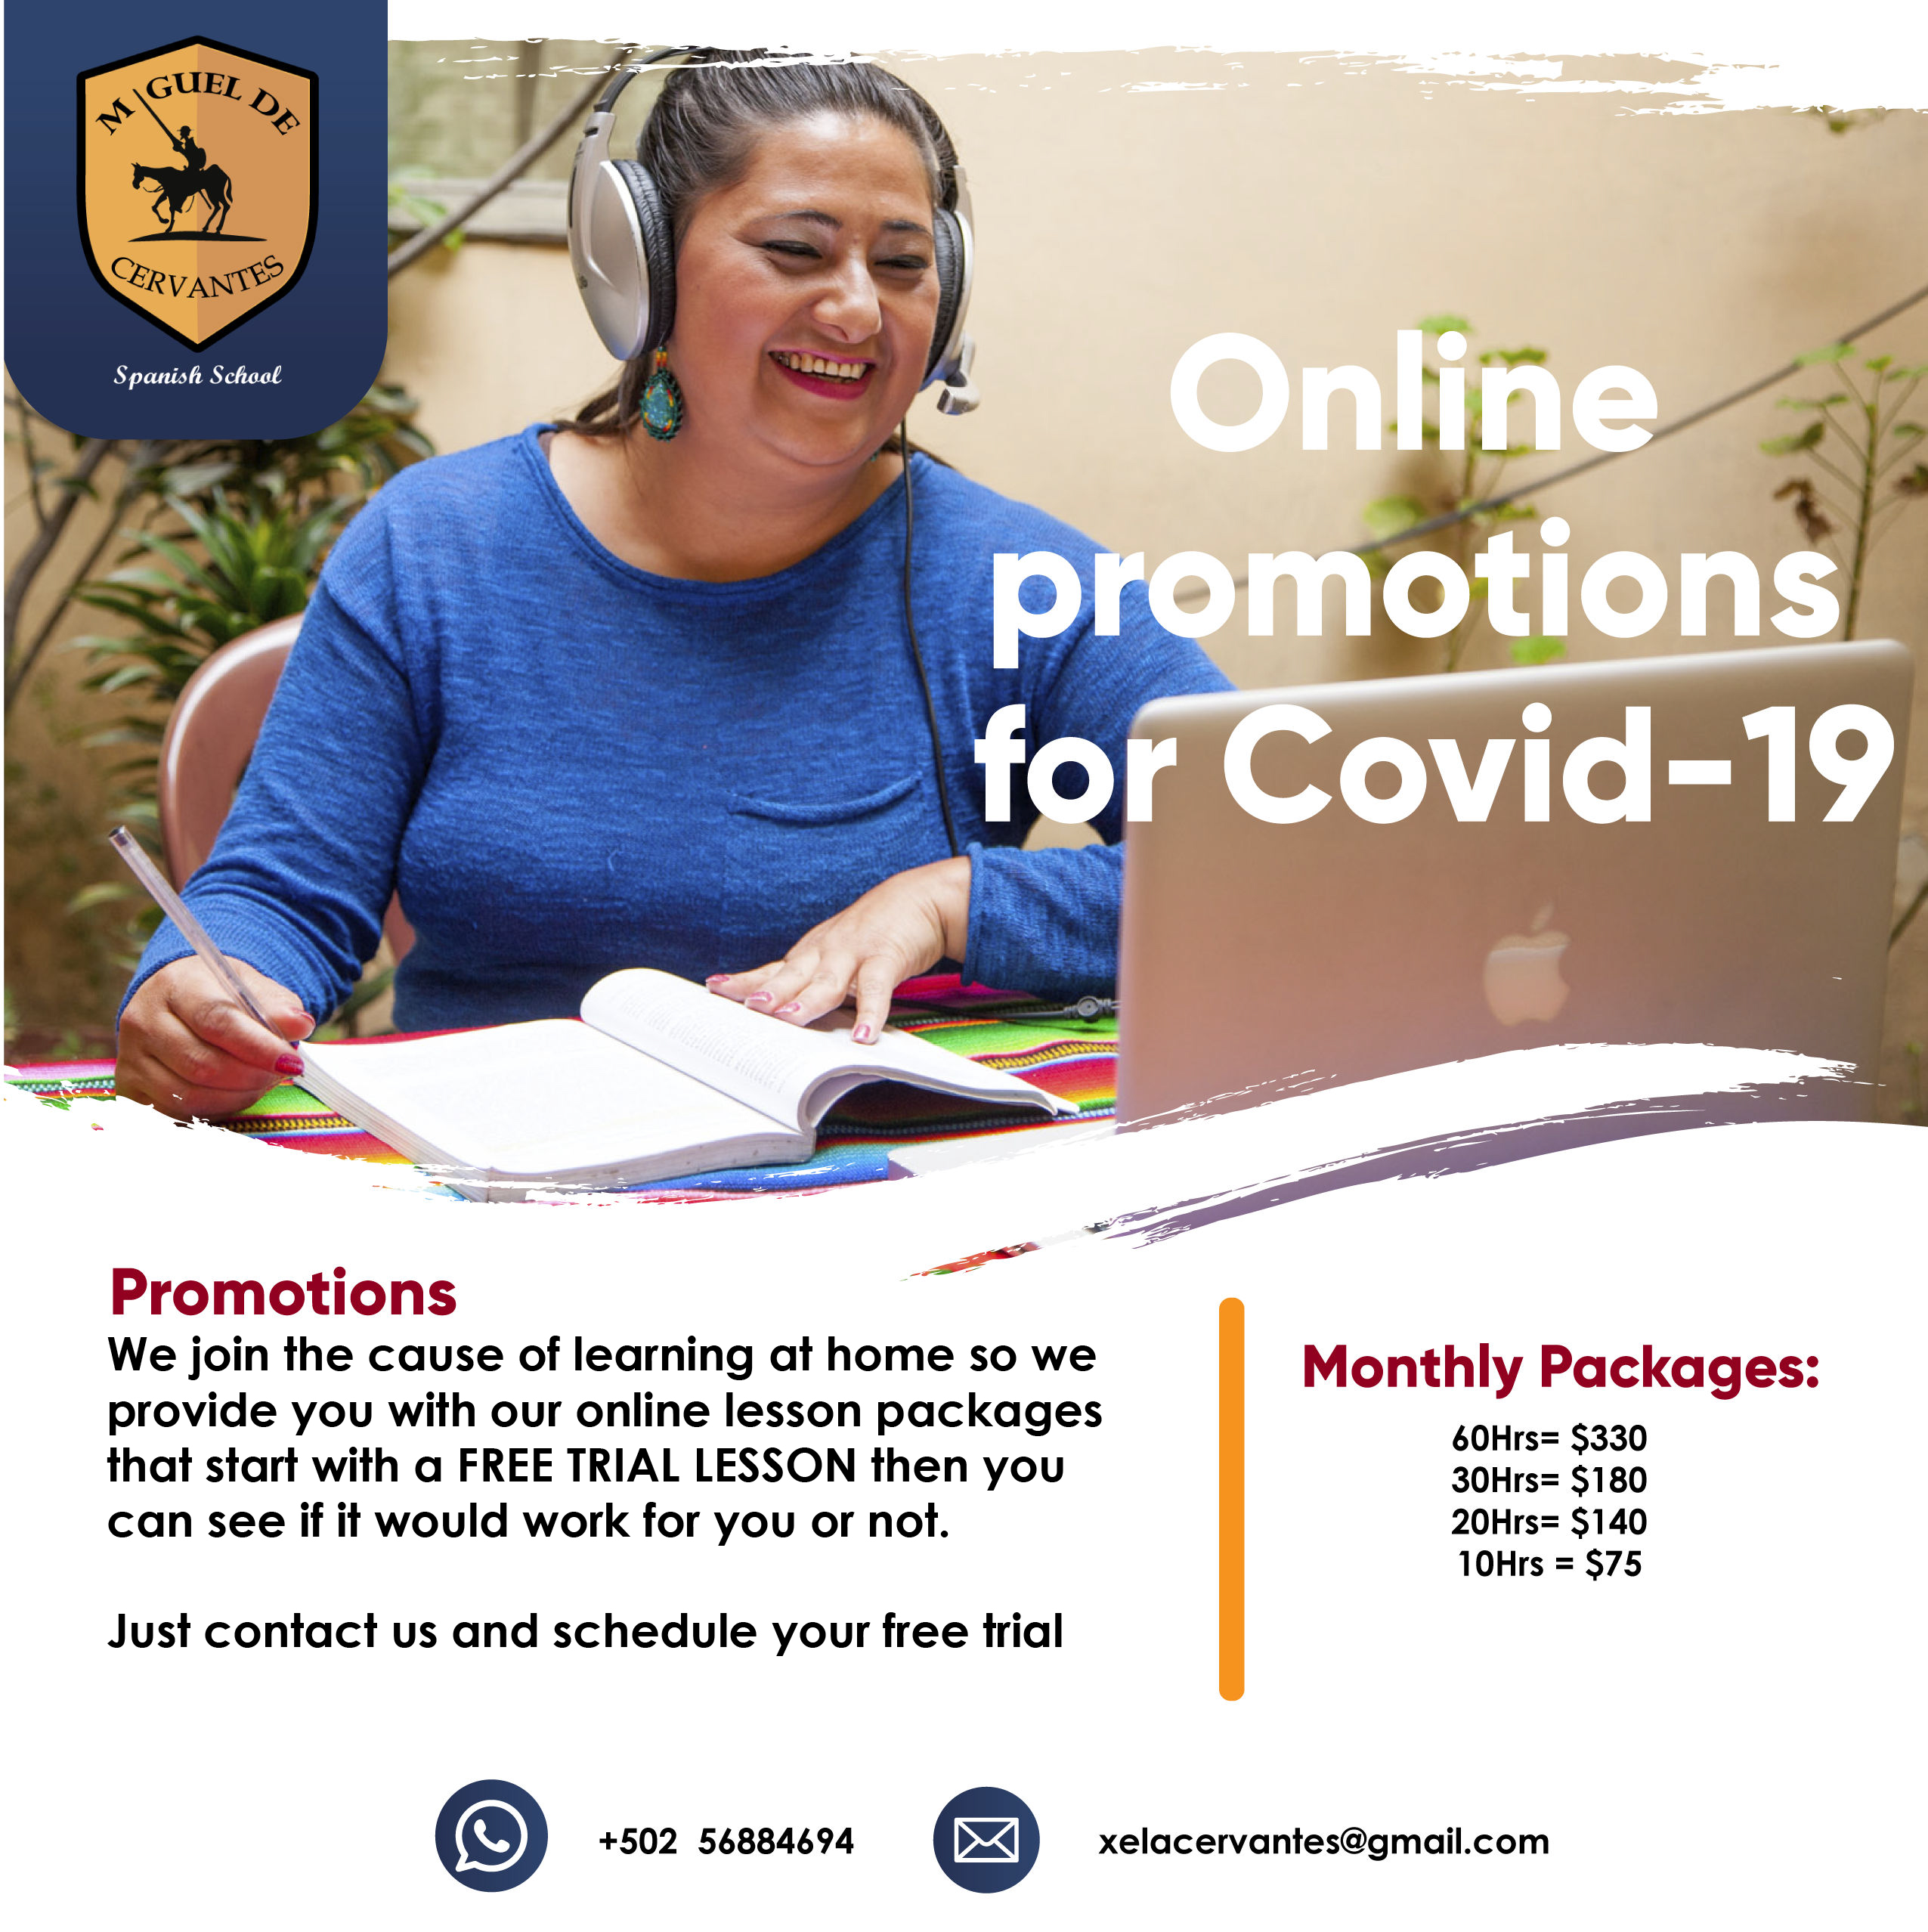 Online promotions for COVID-19